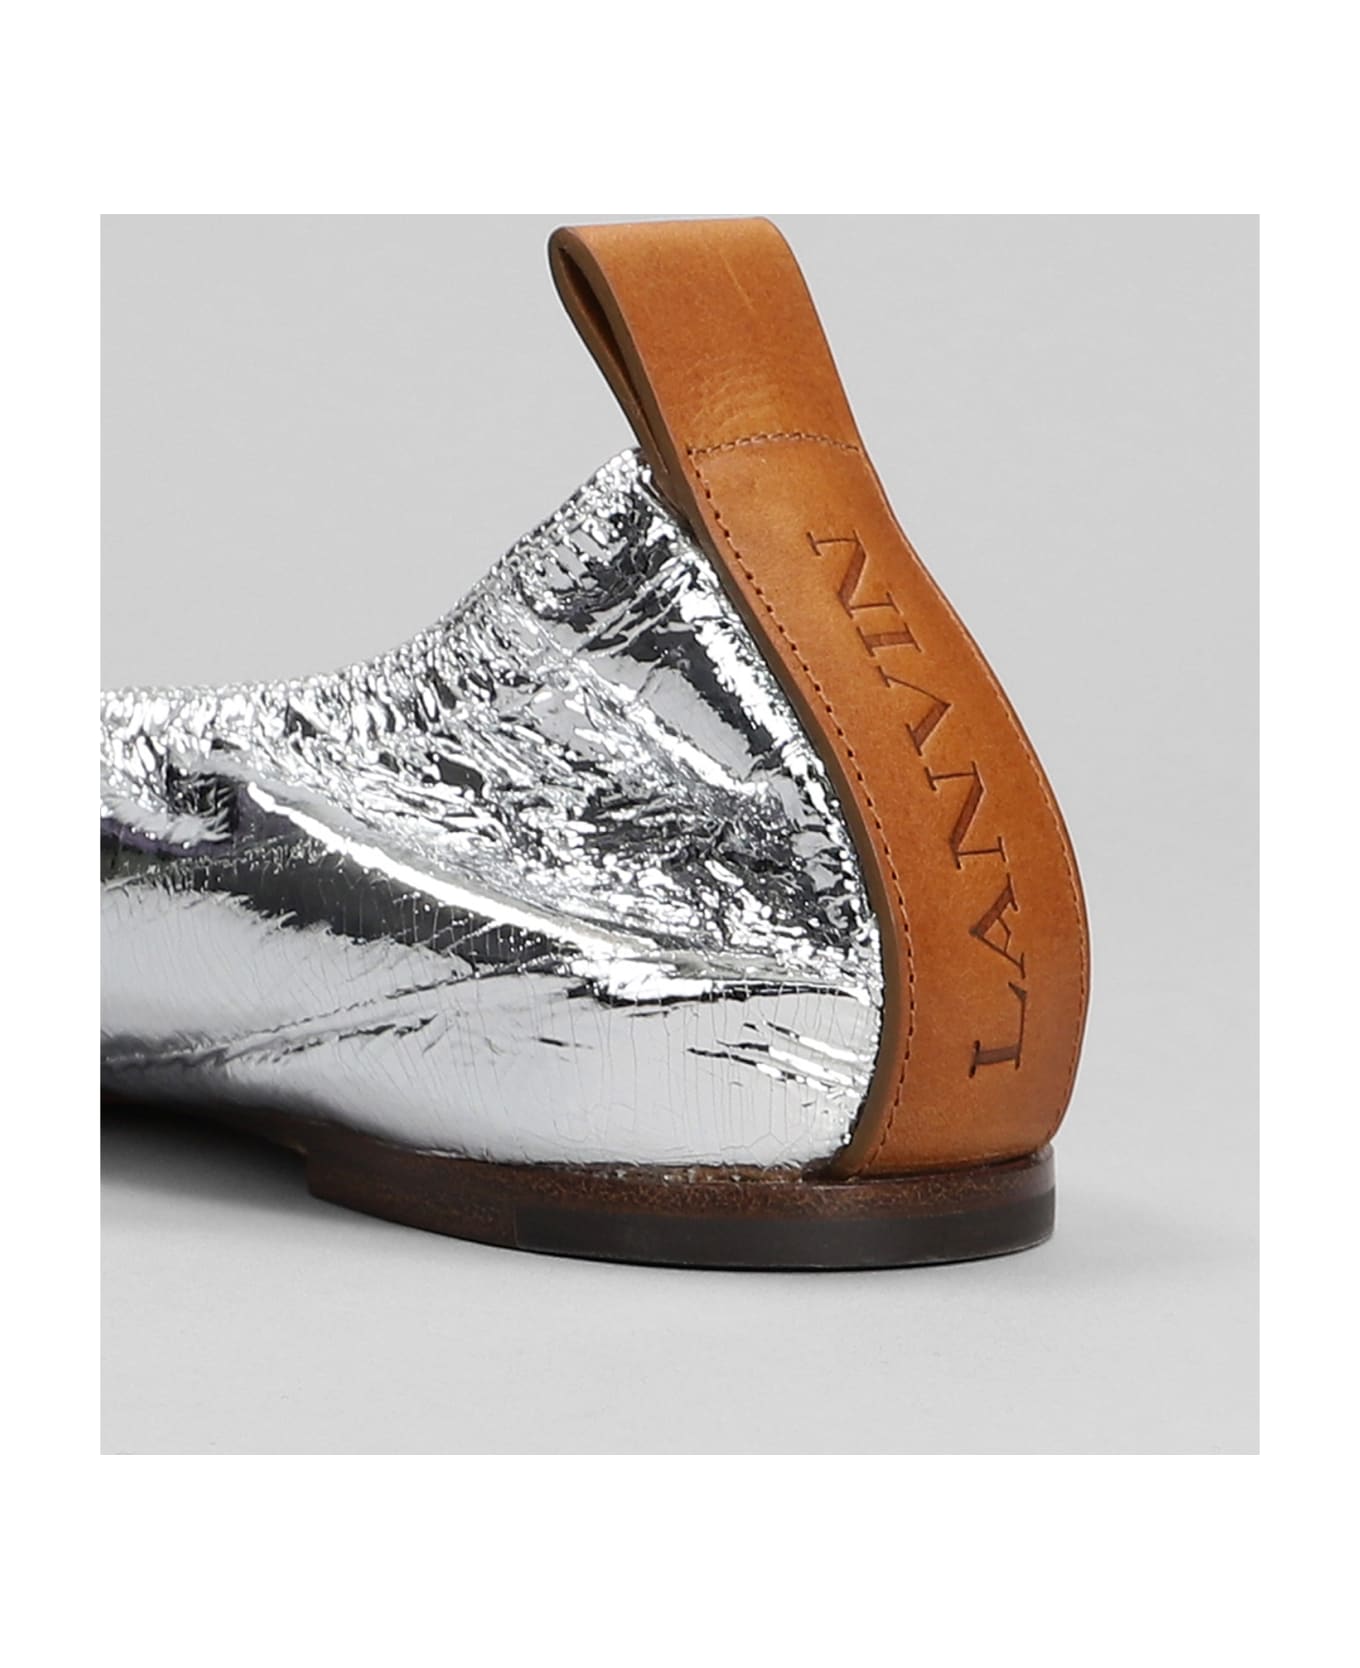 Lanvin Ballet Flats In Silver Leather - Silver フラットシューズ